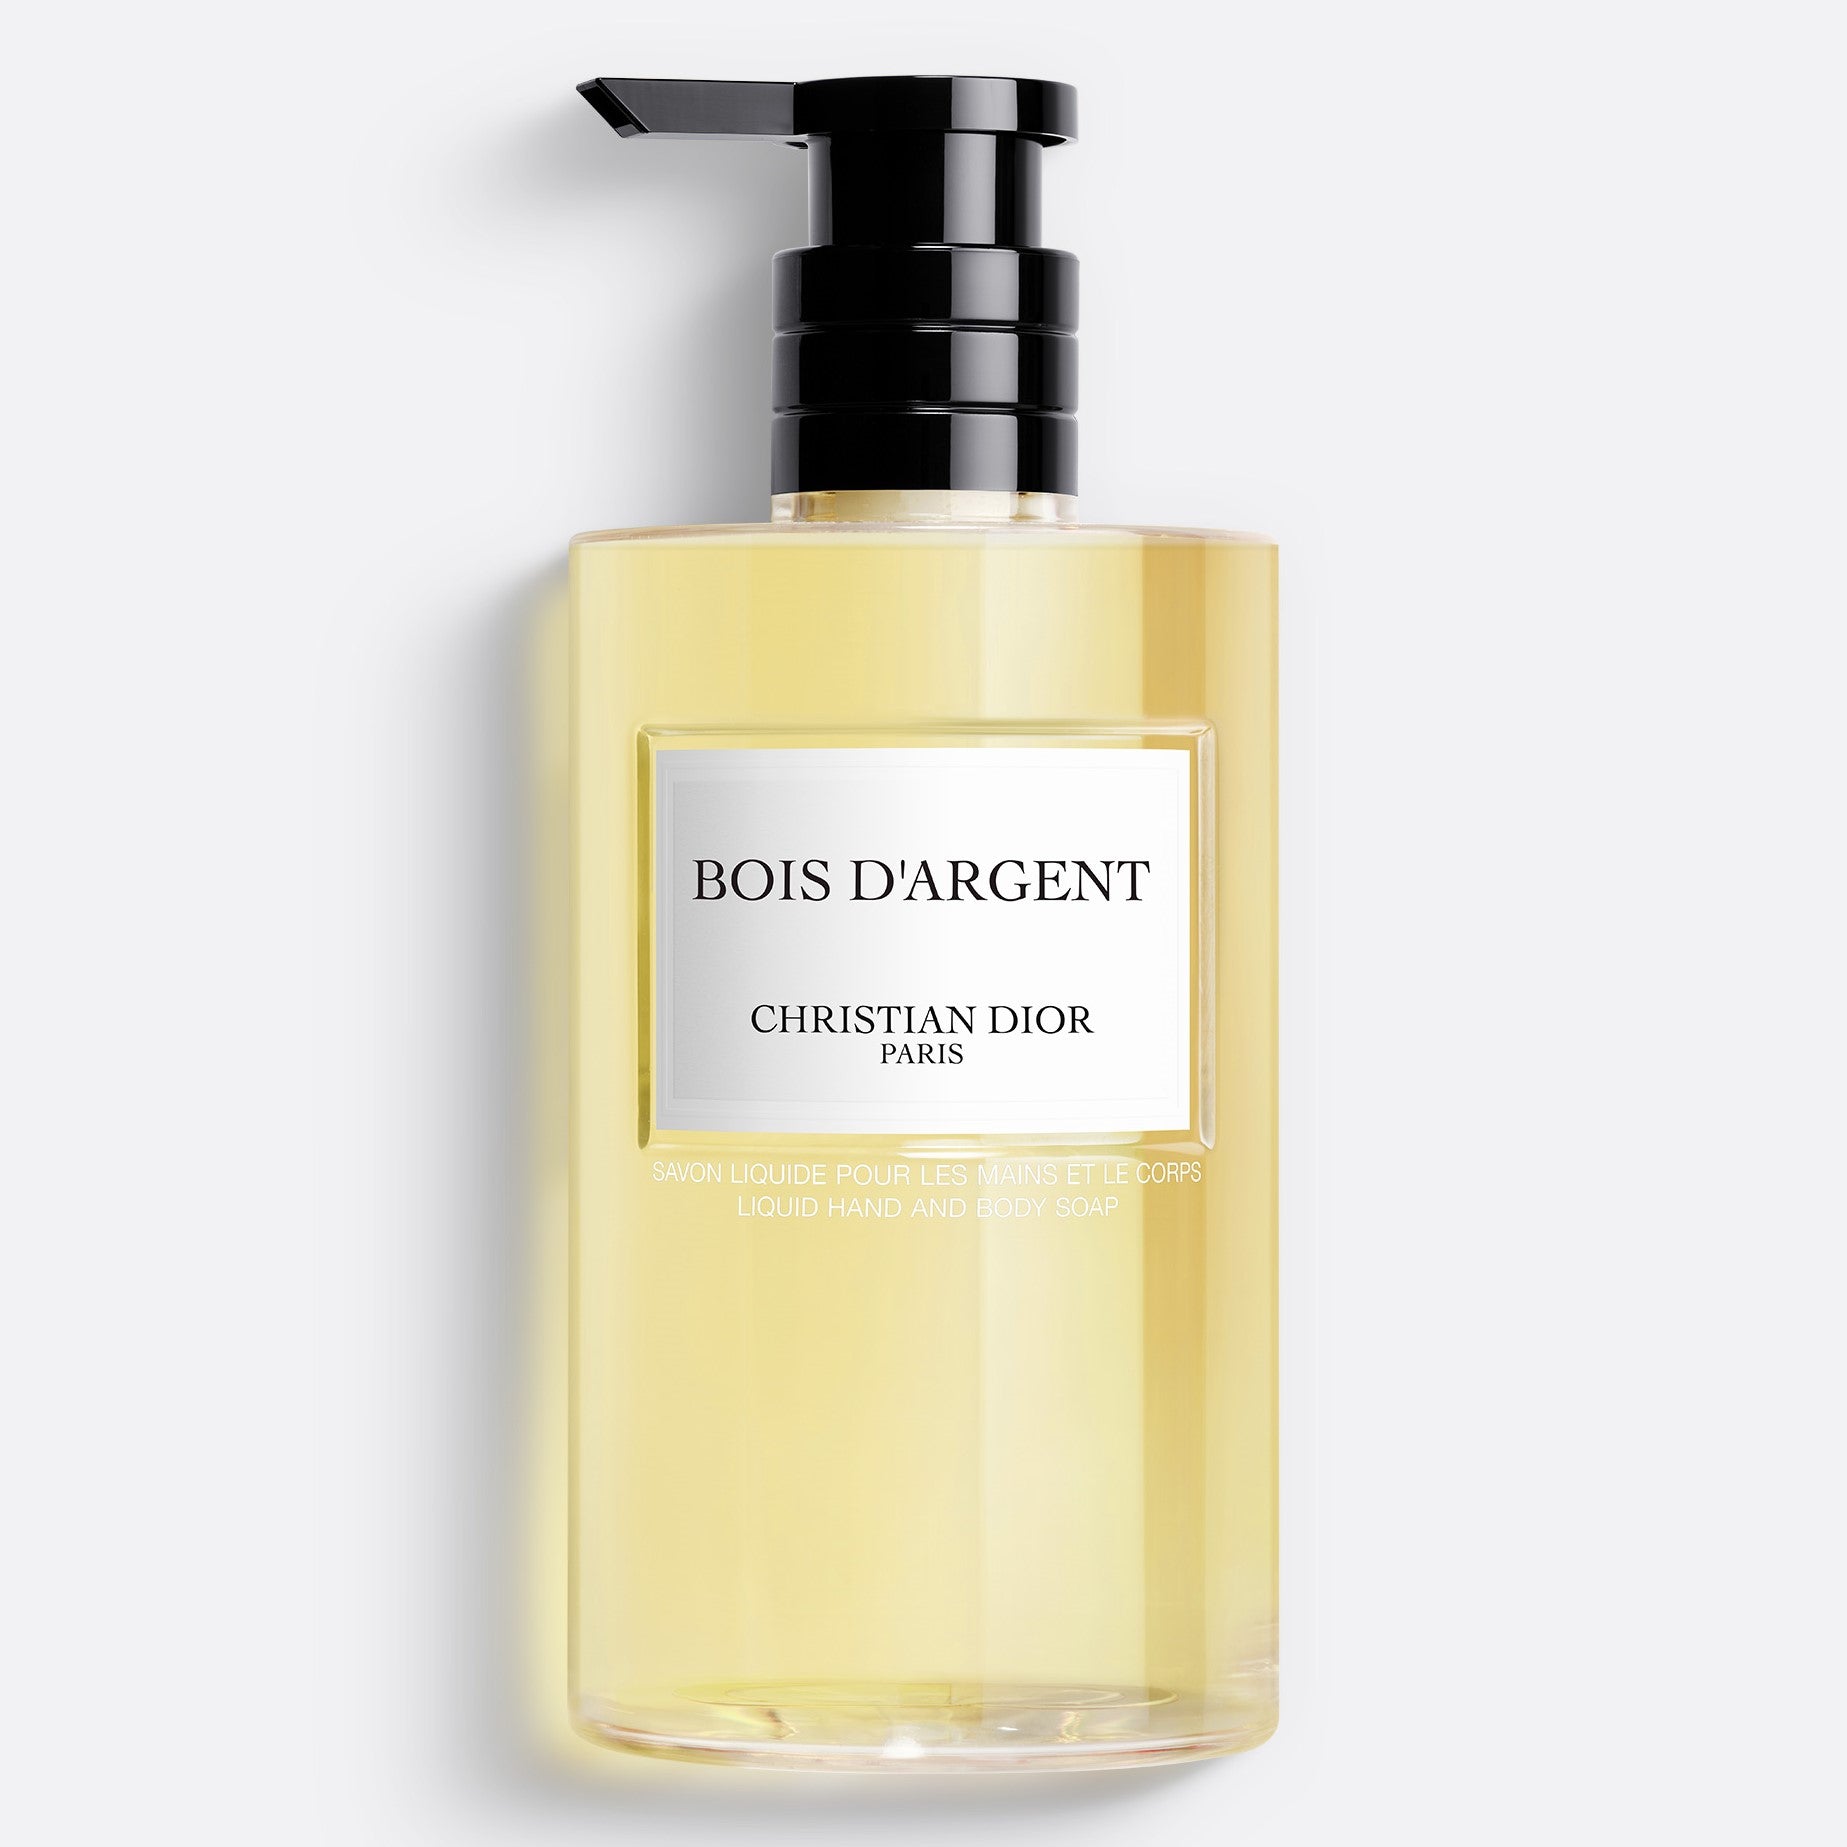 BOIS D'ARGENT ~ Liquid Hand and Body Soap